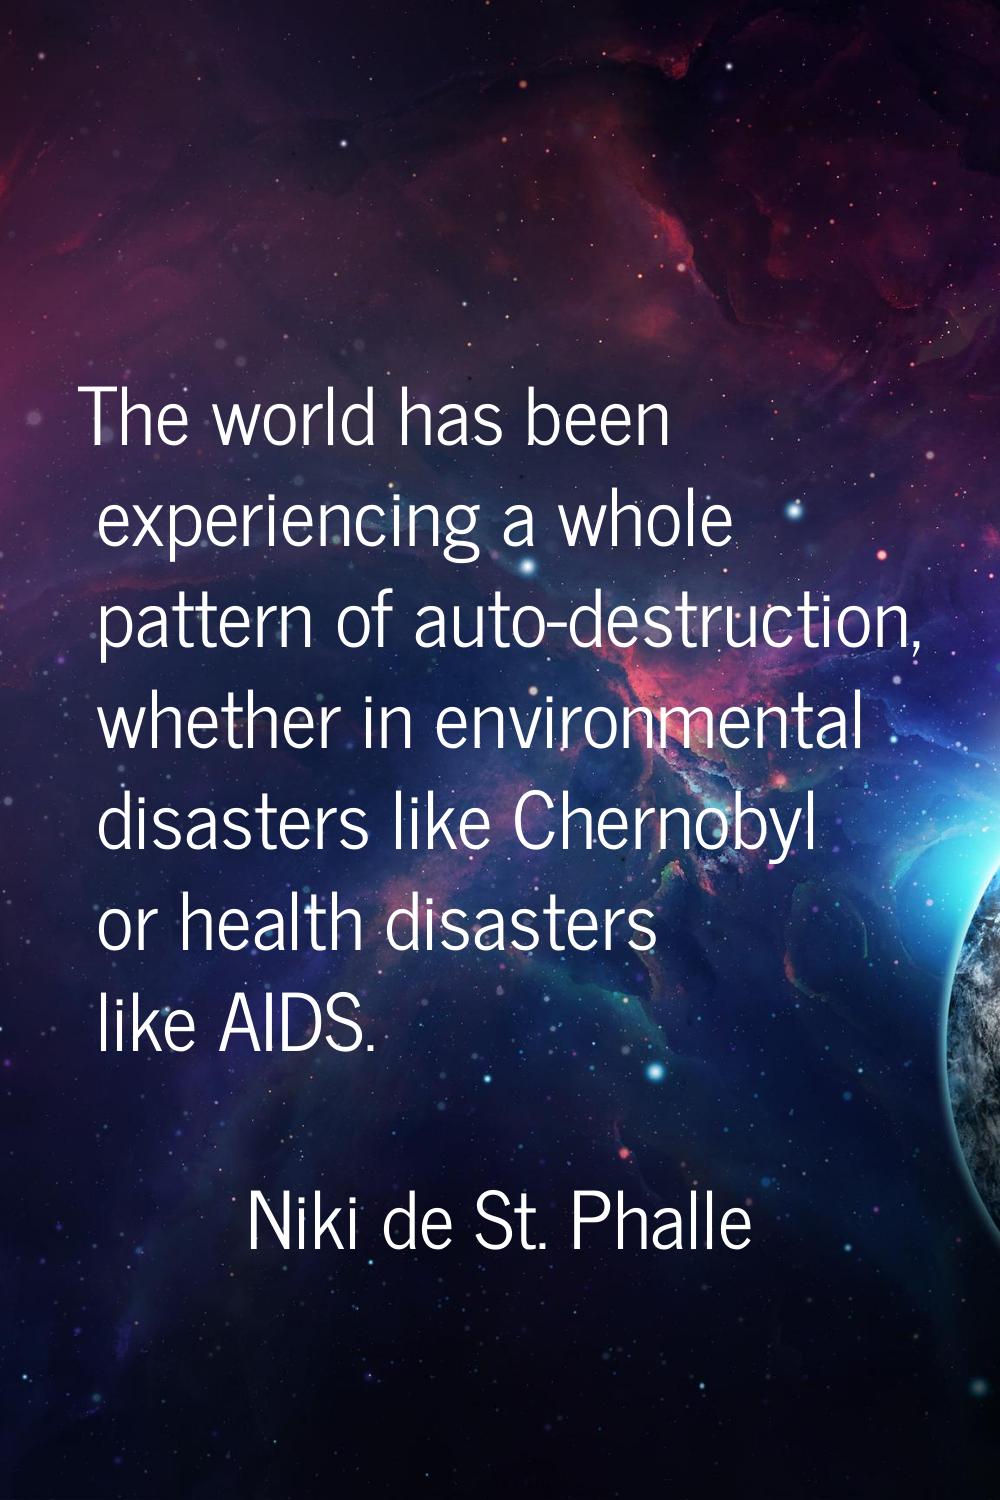 The world has been experiencing a whole pattern of auto-destruction, whether in environmental disas